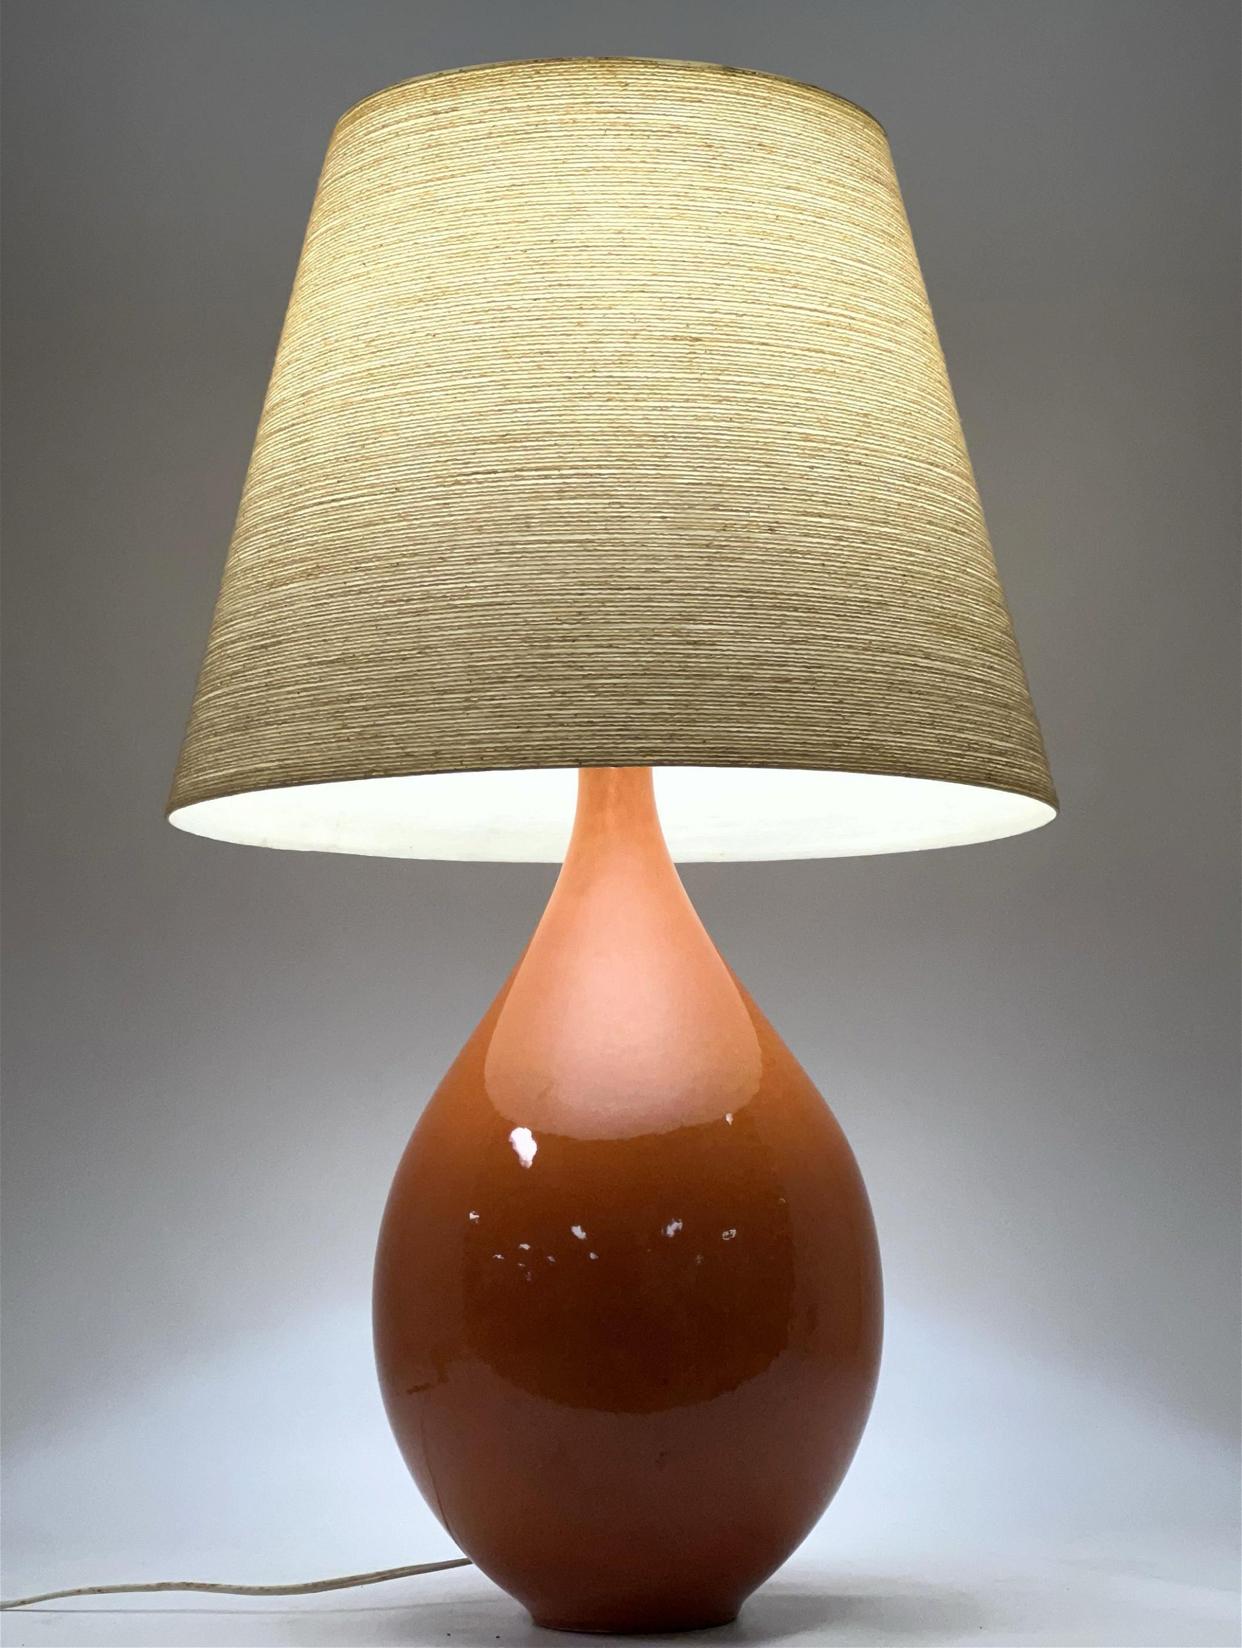 Mid-20th Century Large Bostlund Gourd Form Ceramic Table Lamp With Original Bostlund Shade For Sale